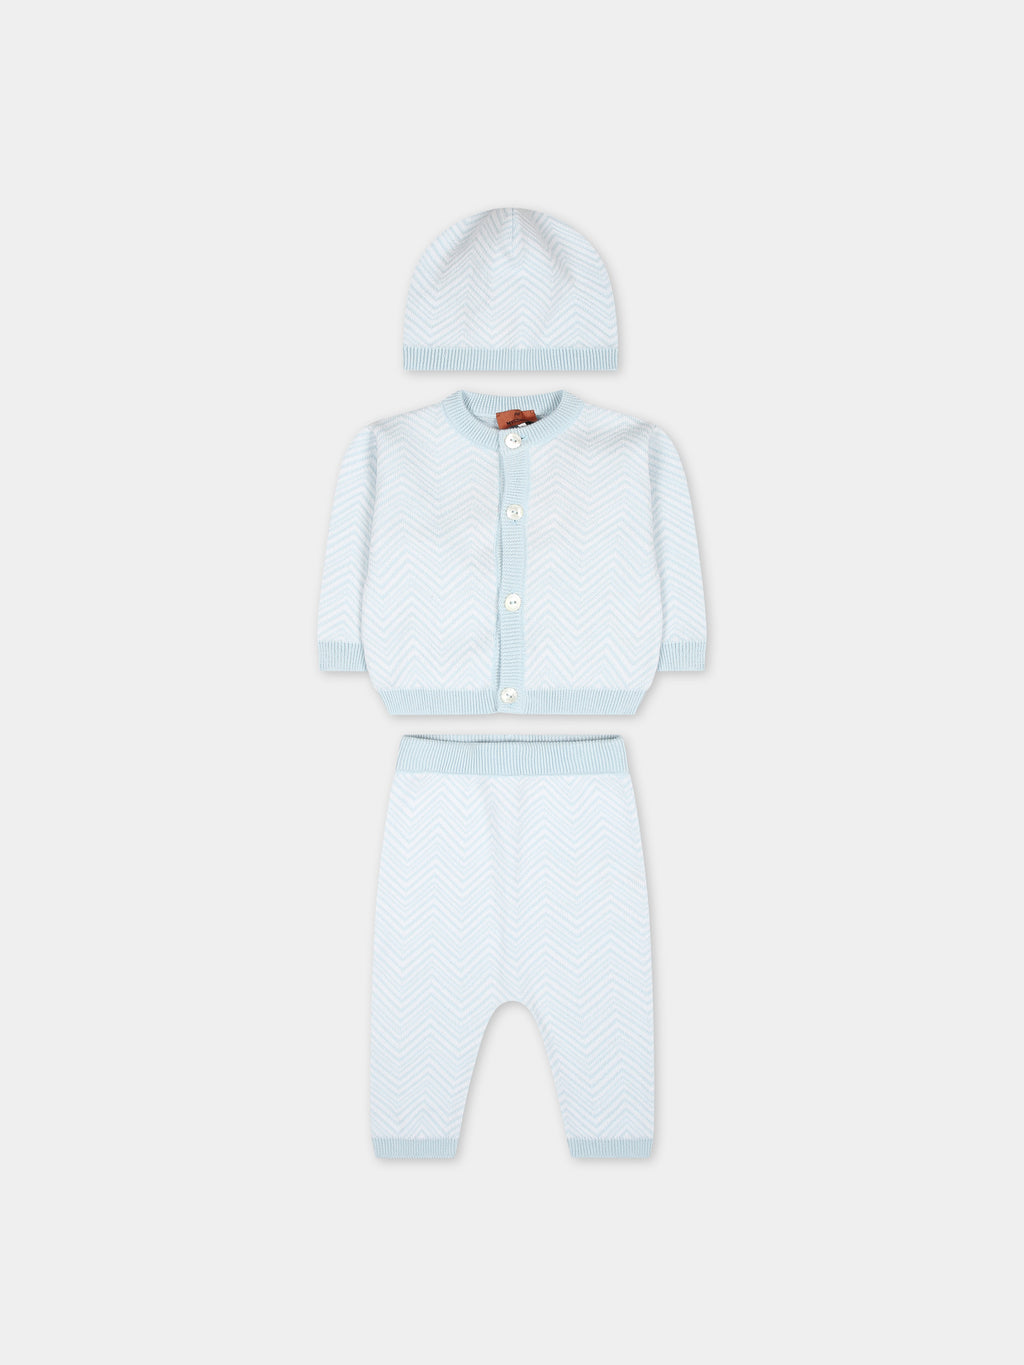 Sky blue birth suit for baby boy with chevron pattern